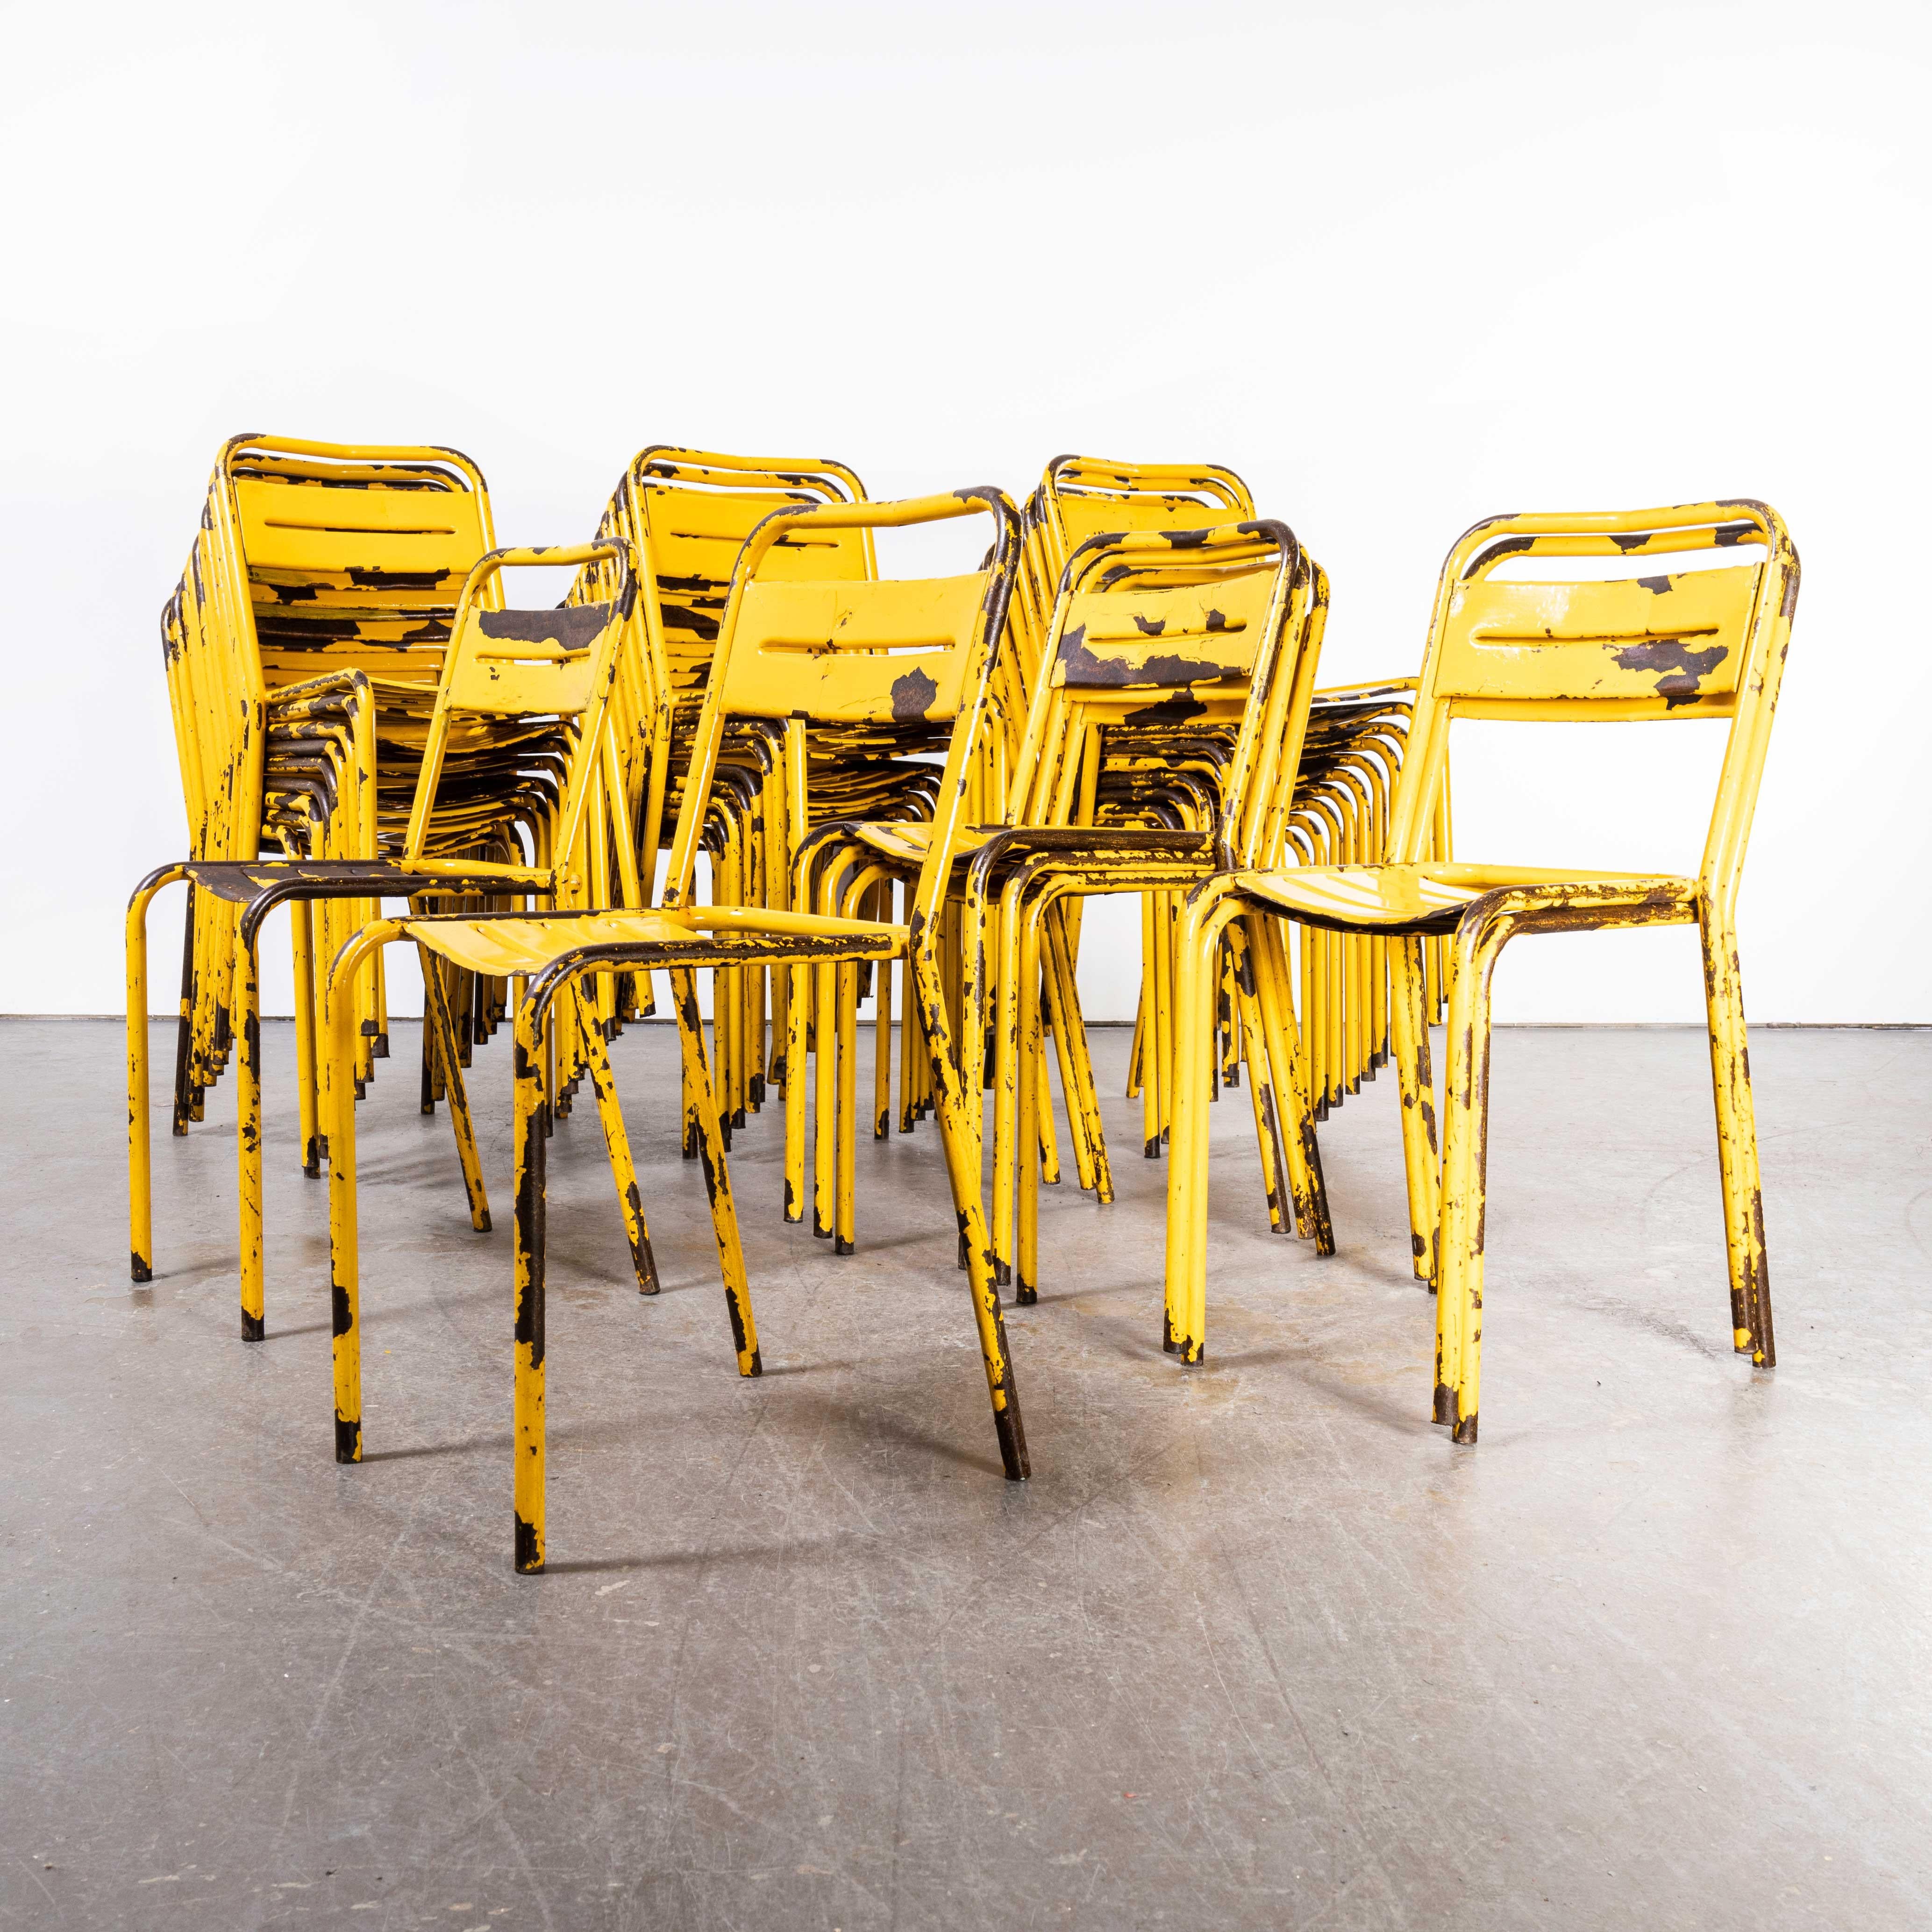 1950’s French yellow metal outdoor dining chairs – good quantities available
1950’s French yellow metal outdoor dining chairs – good quantities available. Similar to Tolix but not made by Tolix, these chairs were industrially produced in France in